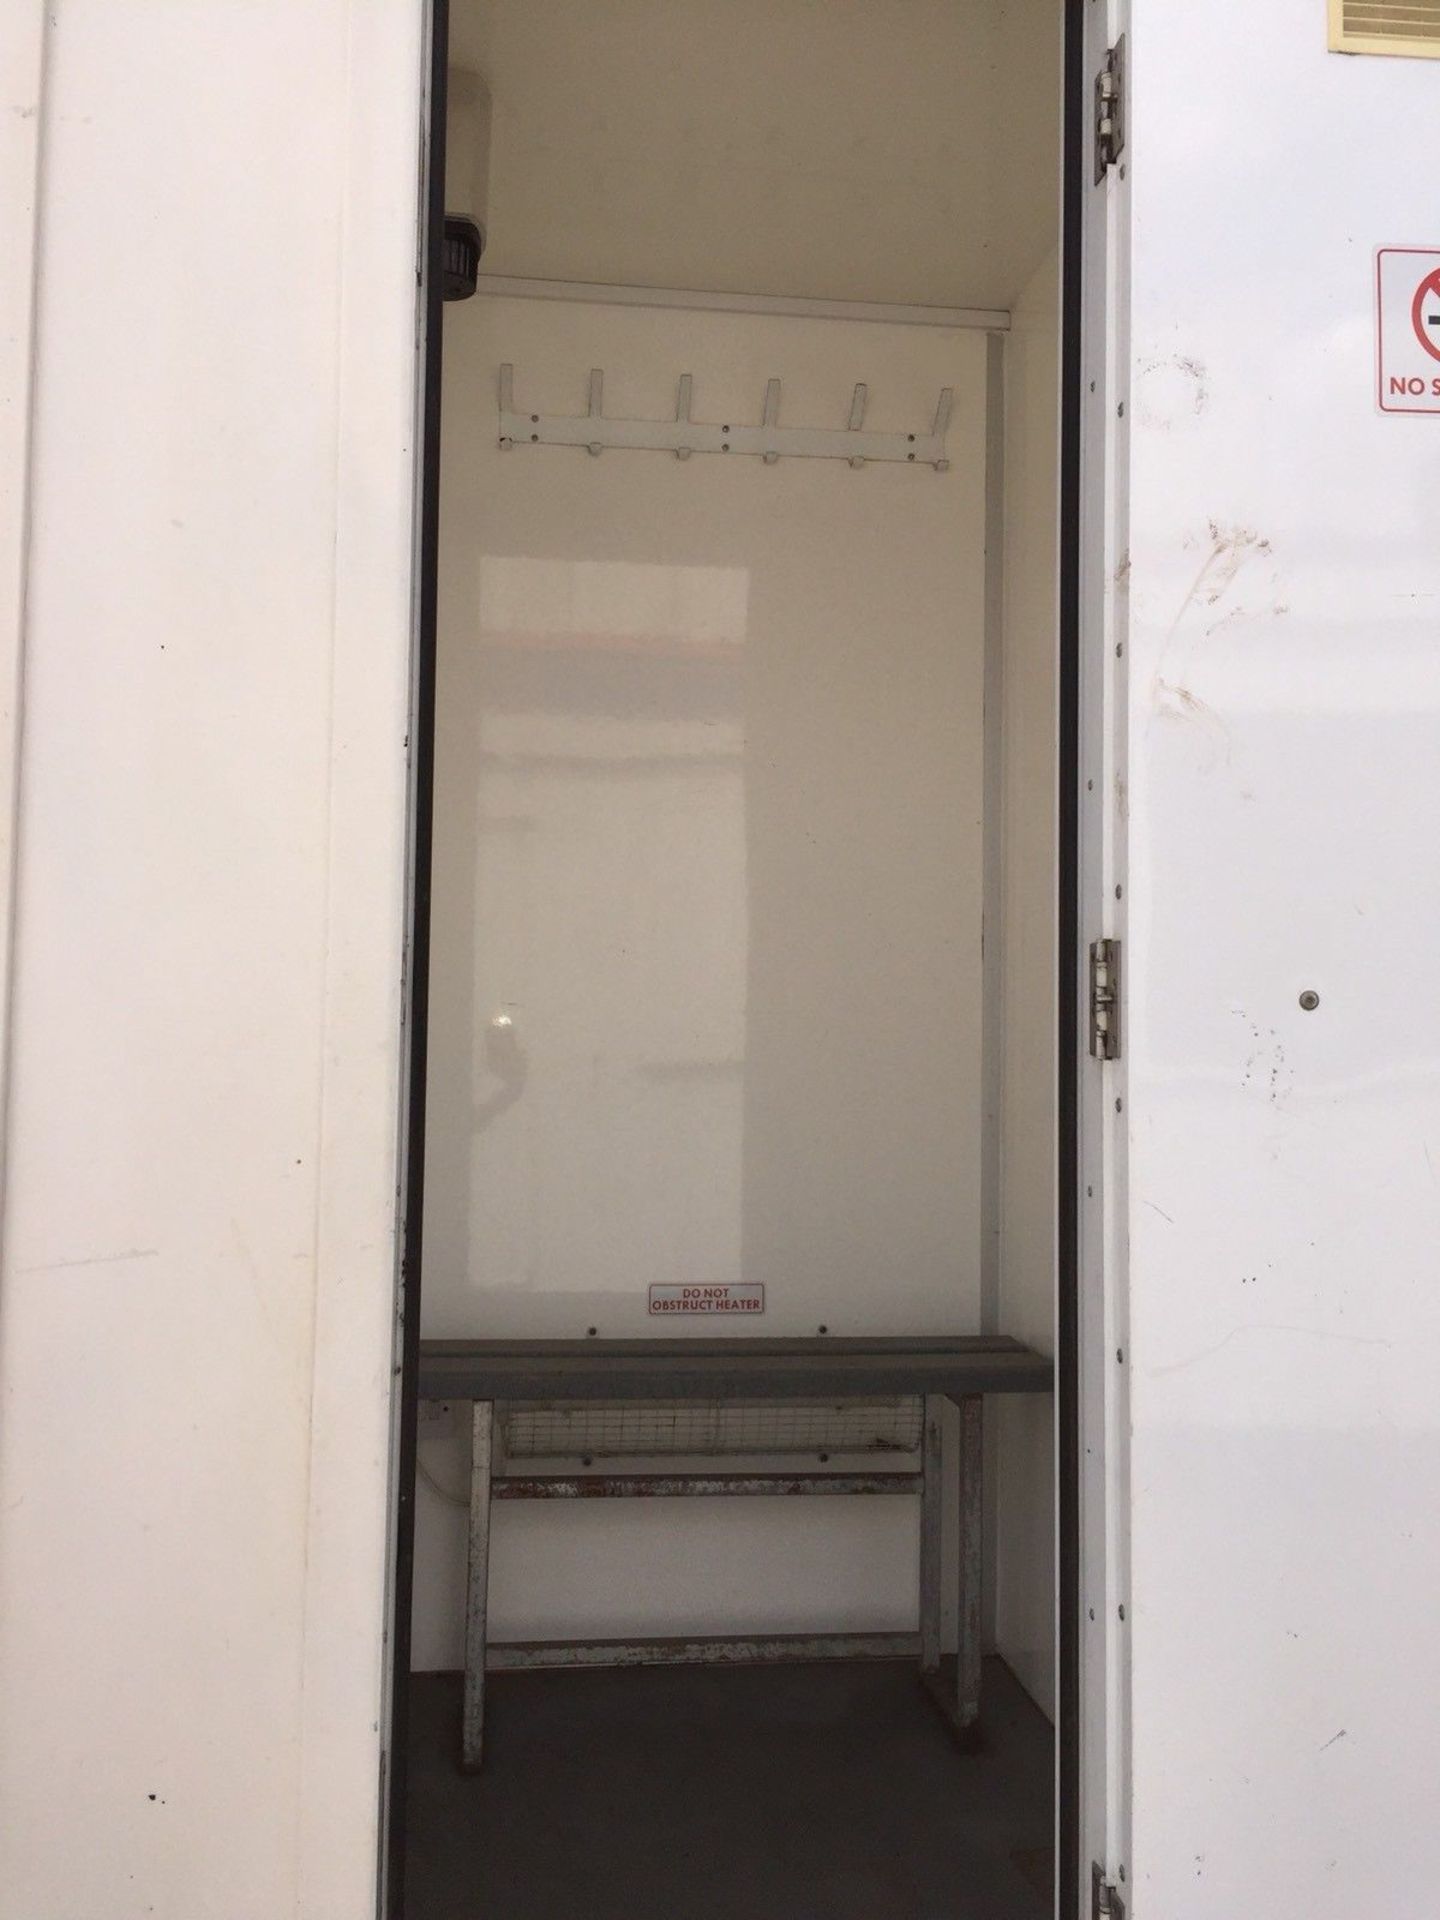 AJC Towable Anti Vandal Welfare Unit With Generator - Image 10 of 12